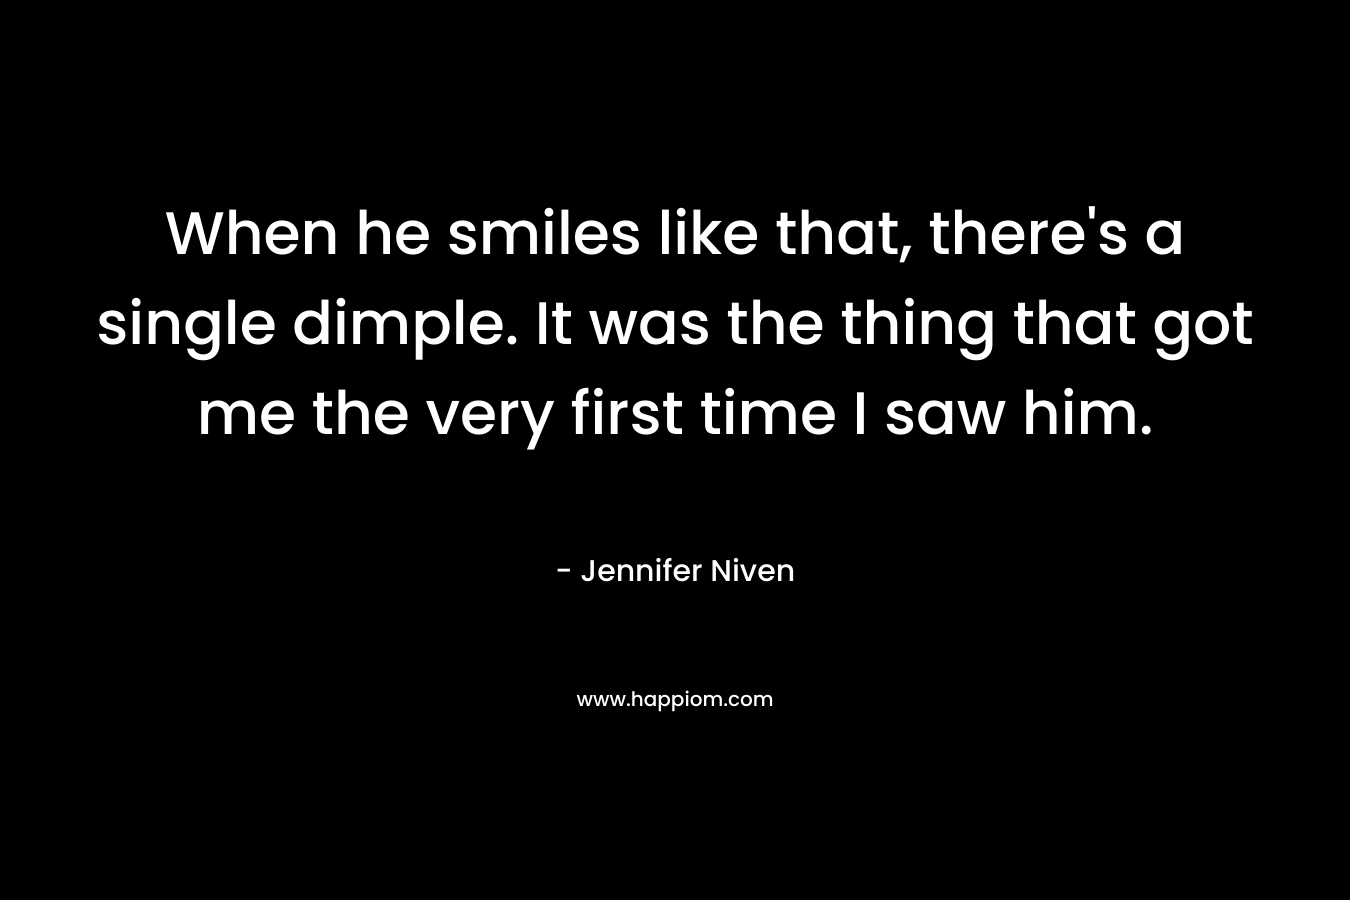 When he smiles like that, there’s a single dimple. It was the thing that got me the very first time I saw him. – Jennifer Niven